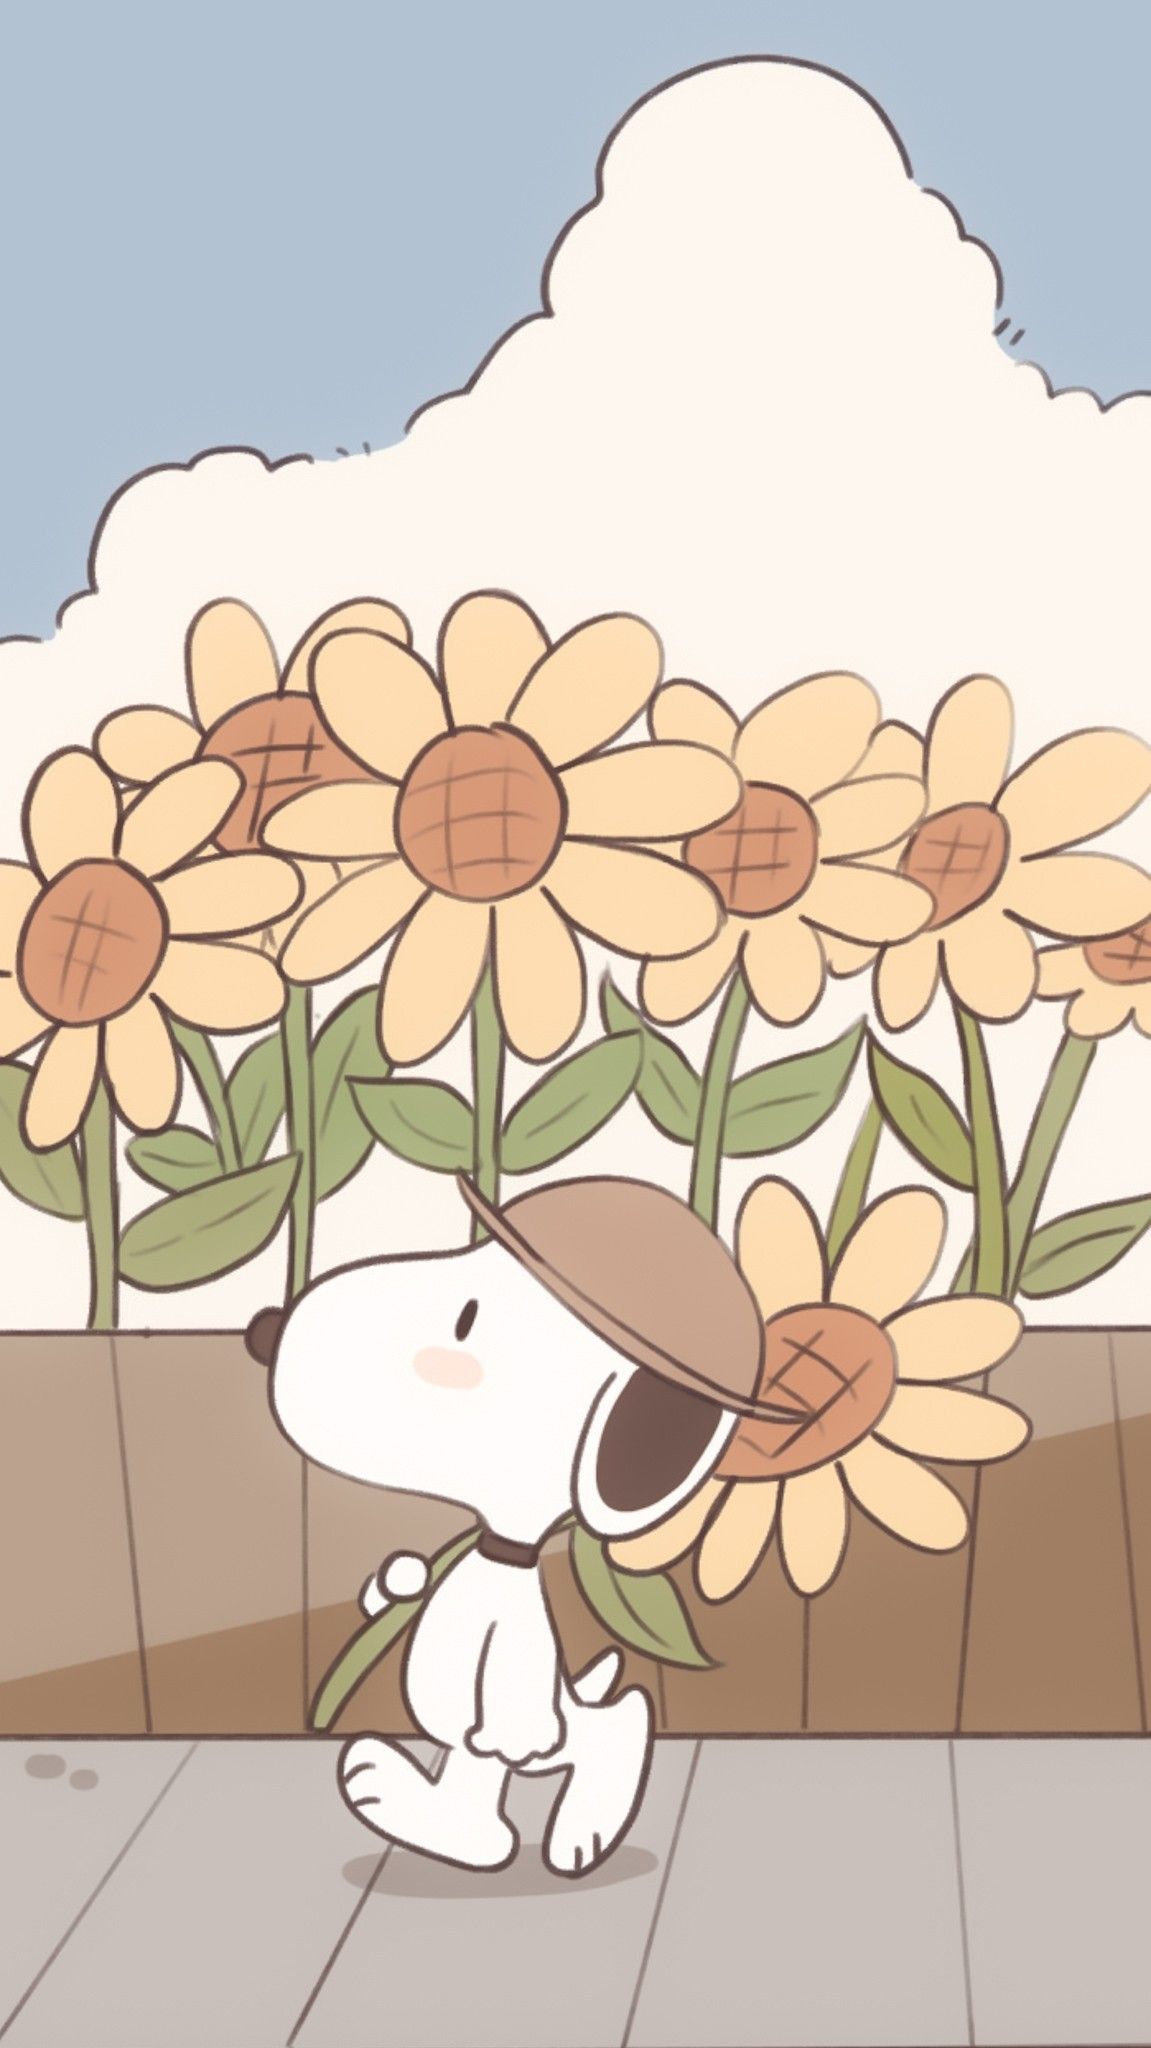 A cute wallpaper of snoopy with a flower - Snoopy